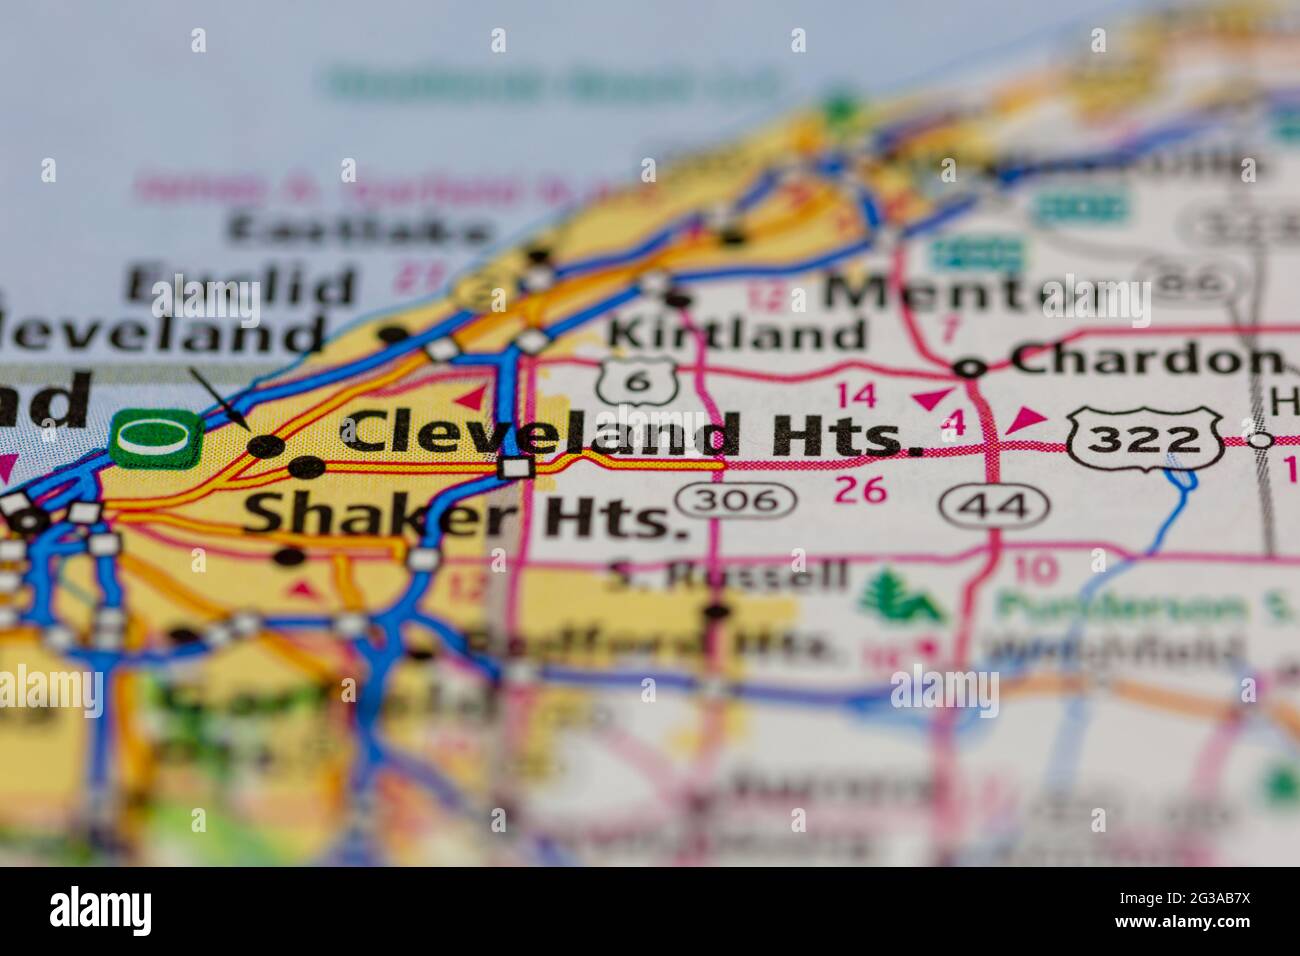 Cleveland Heights Ohio USA shown on a Geography map or Road map Stock Photo